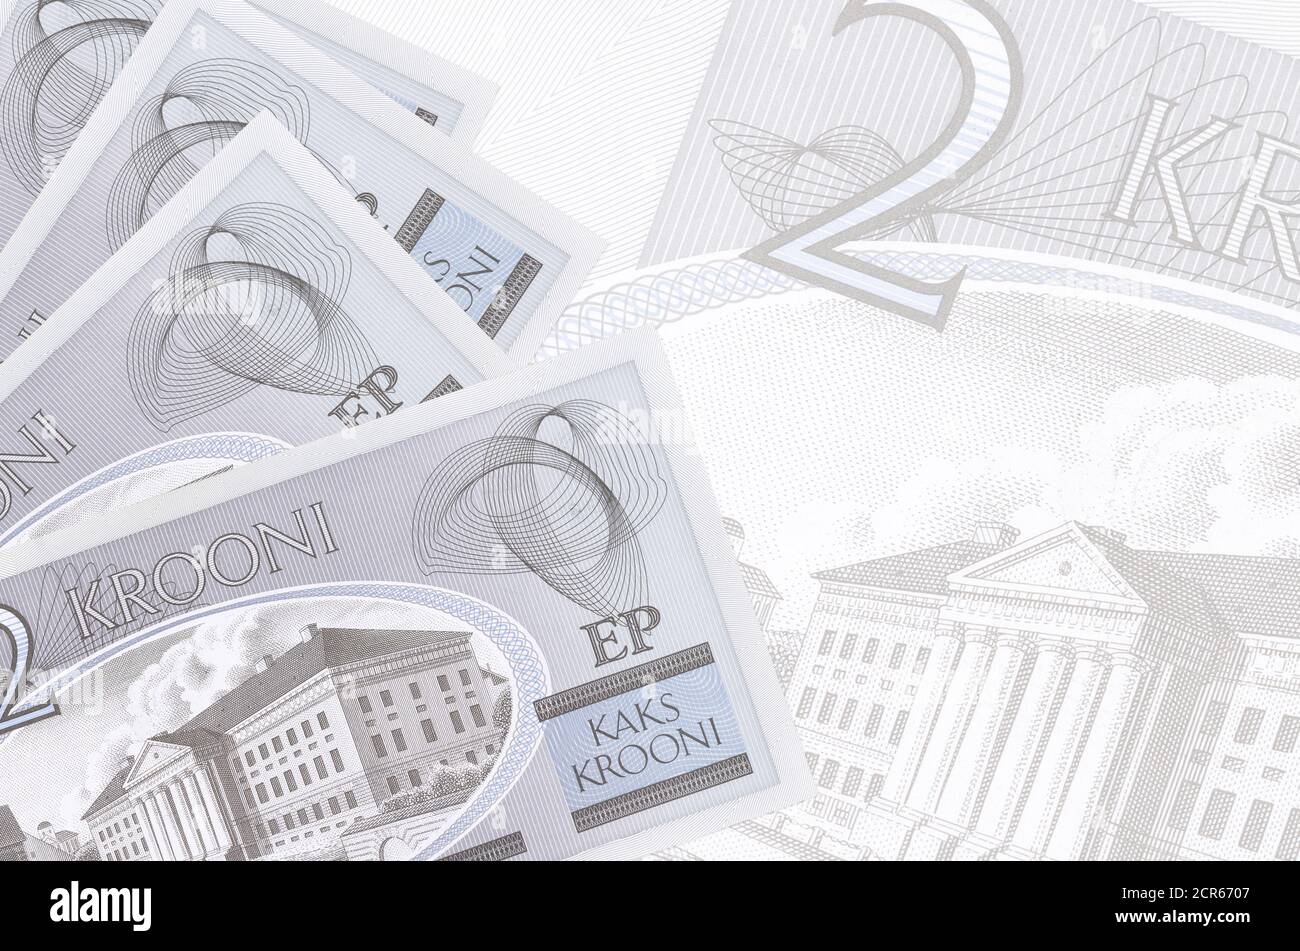 2 Estonian kroon bills lies in stack on background of big semi-transparent banknote. Abstract business background with copy space Stock Photo